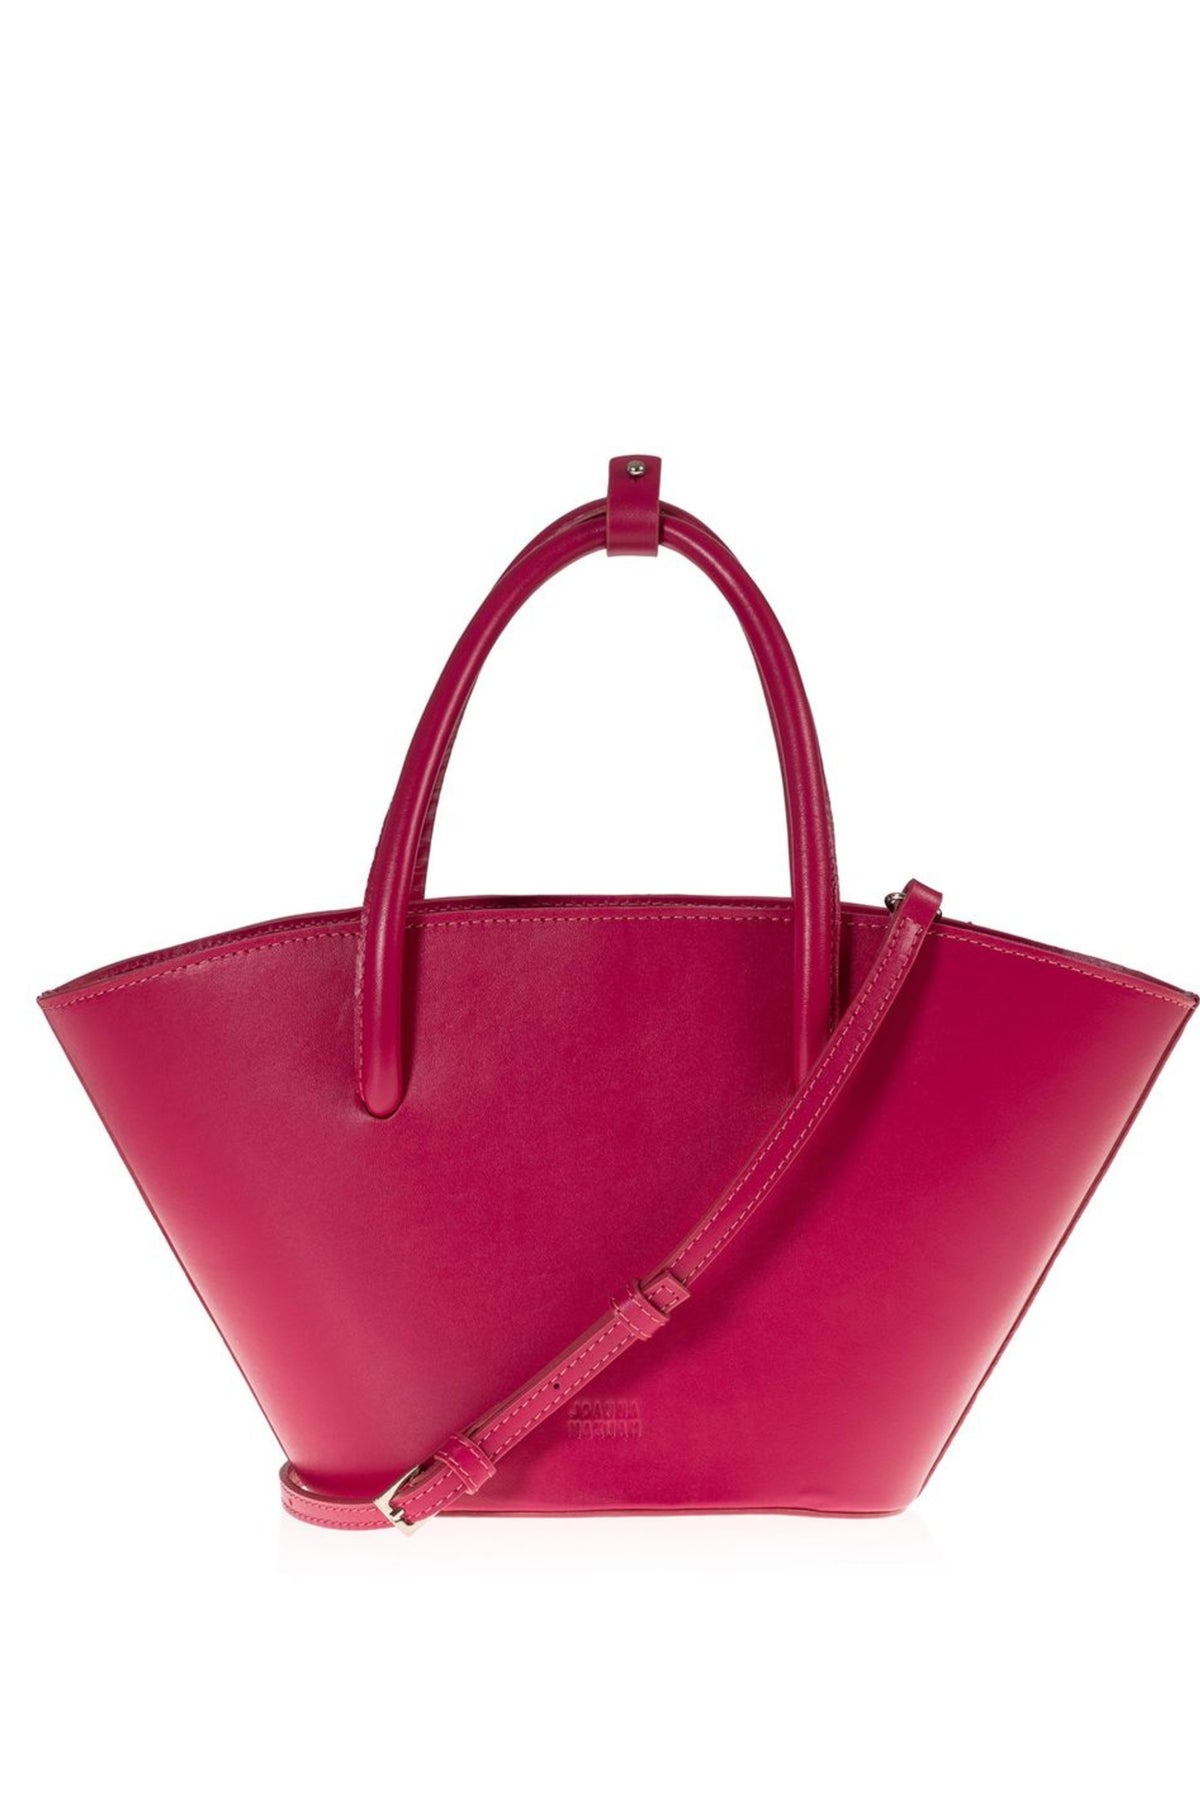 Little Liffner - Open Tulip Embossed Micro Tote Bag - Size: One Size; Color: Pink